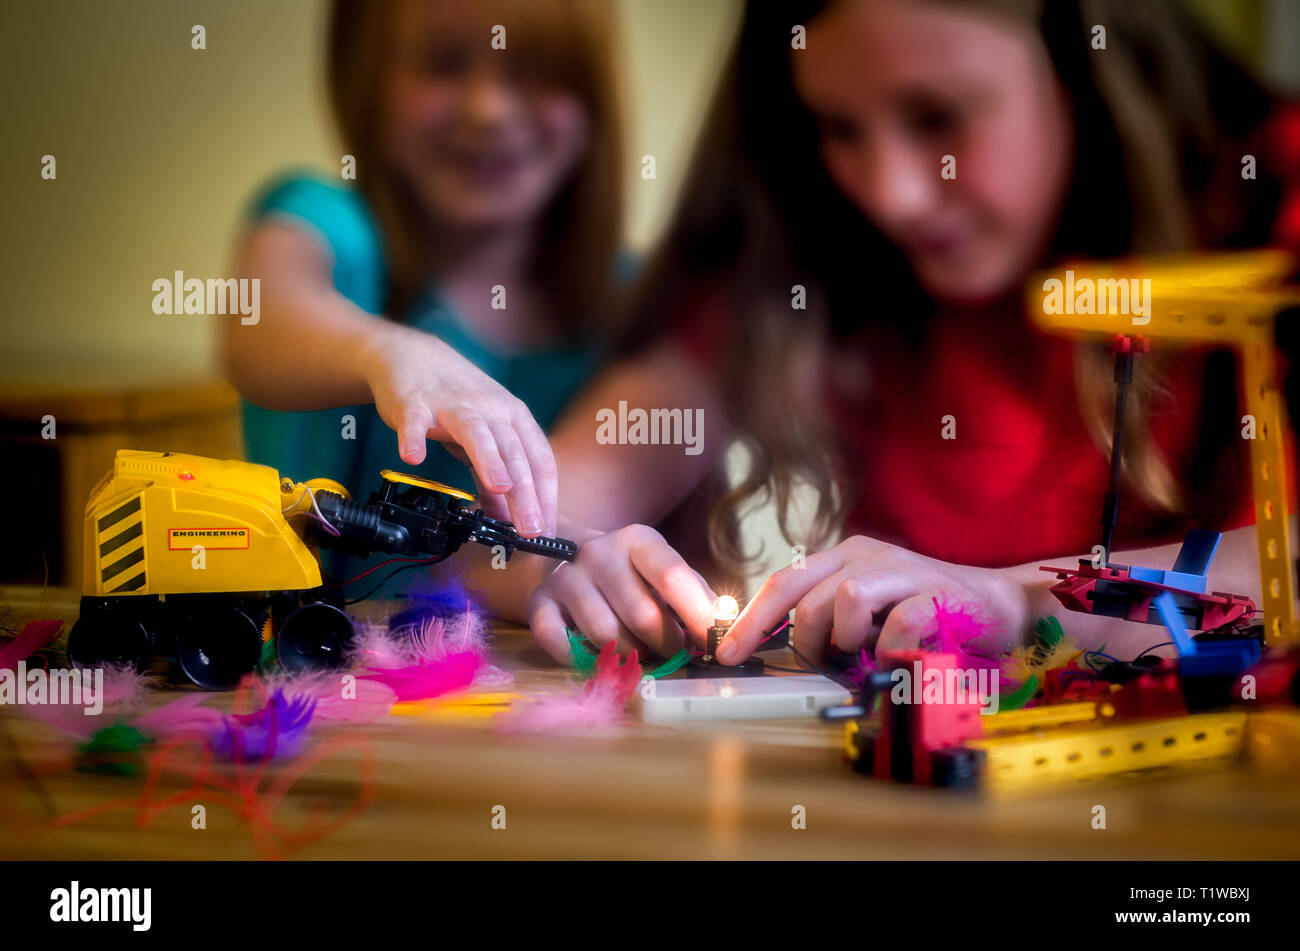 Two Girls Play With Science and Technology Kits Stock Photo